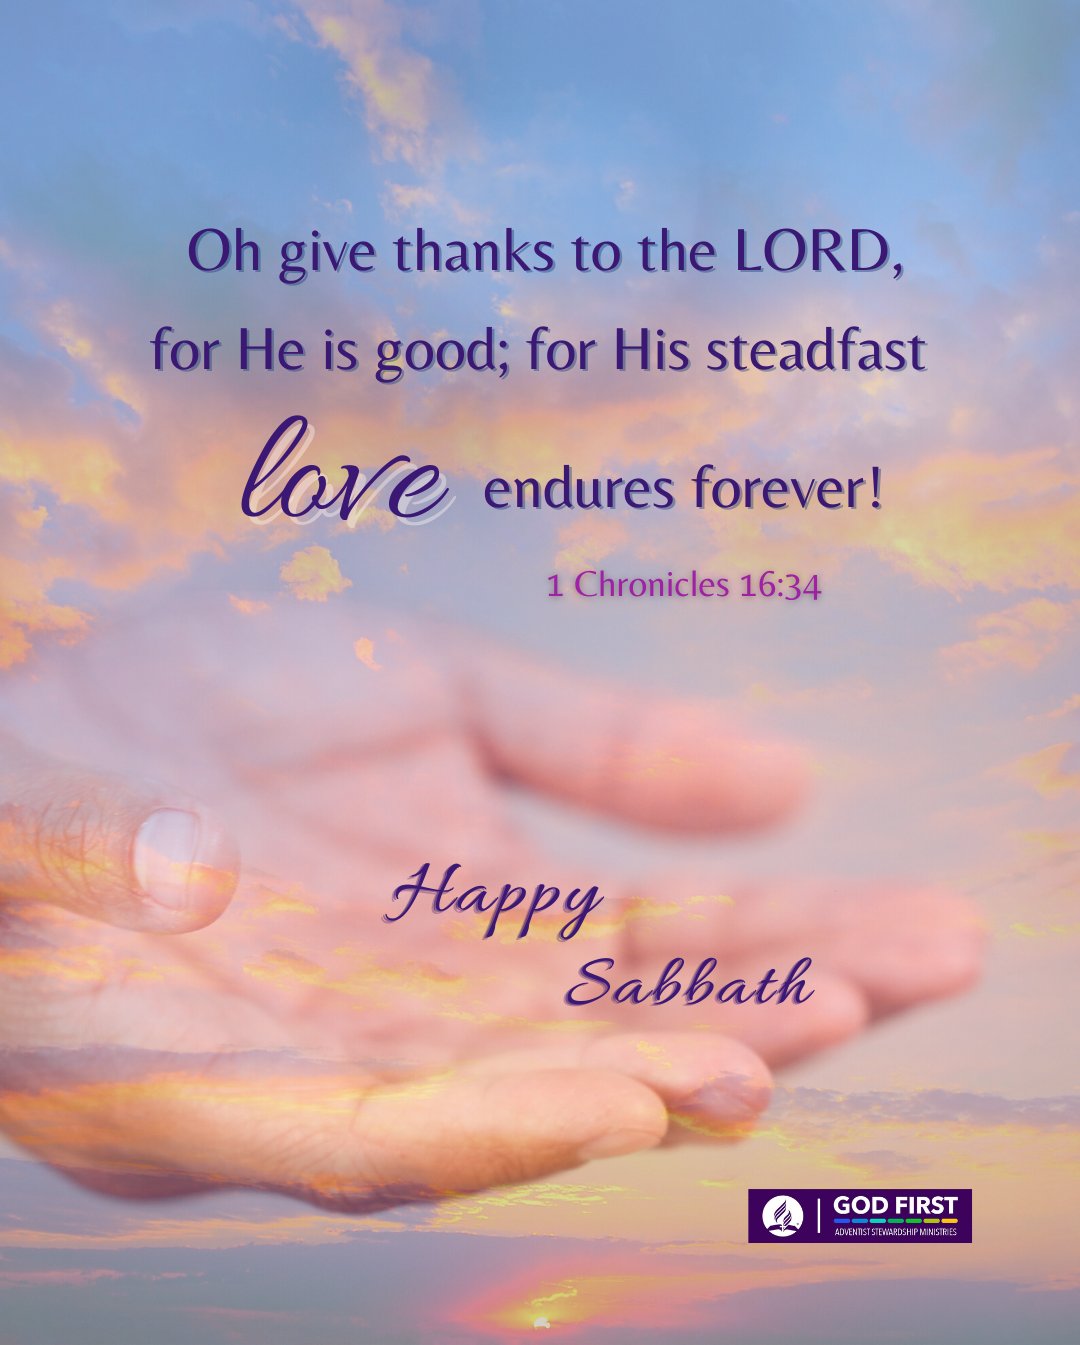 Oh give thanks to the LORD, for He is good; for His steadfast lore endures forever! 1 Chronicles 16.34 Sabbath GOD FIRST Happy